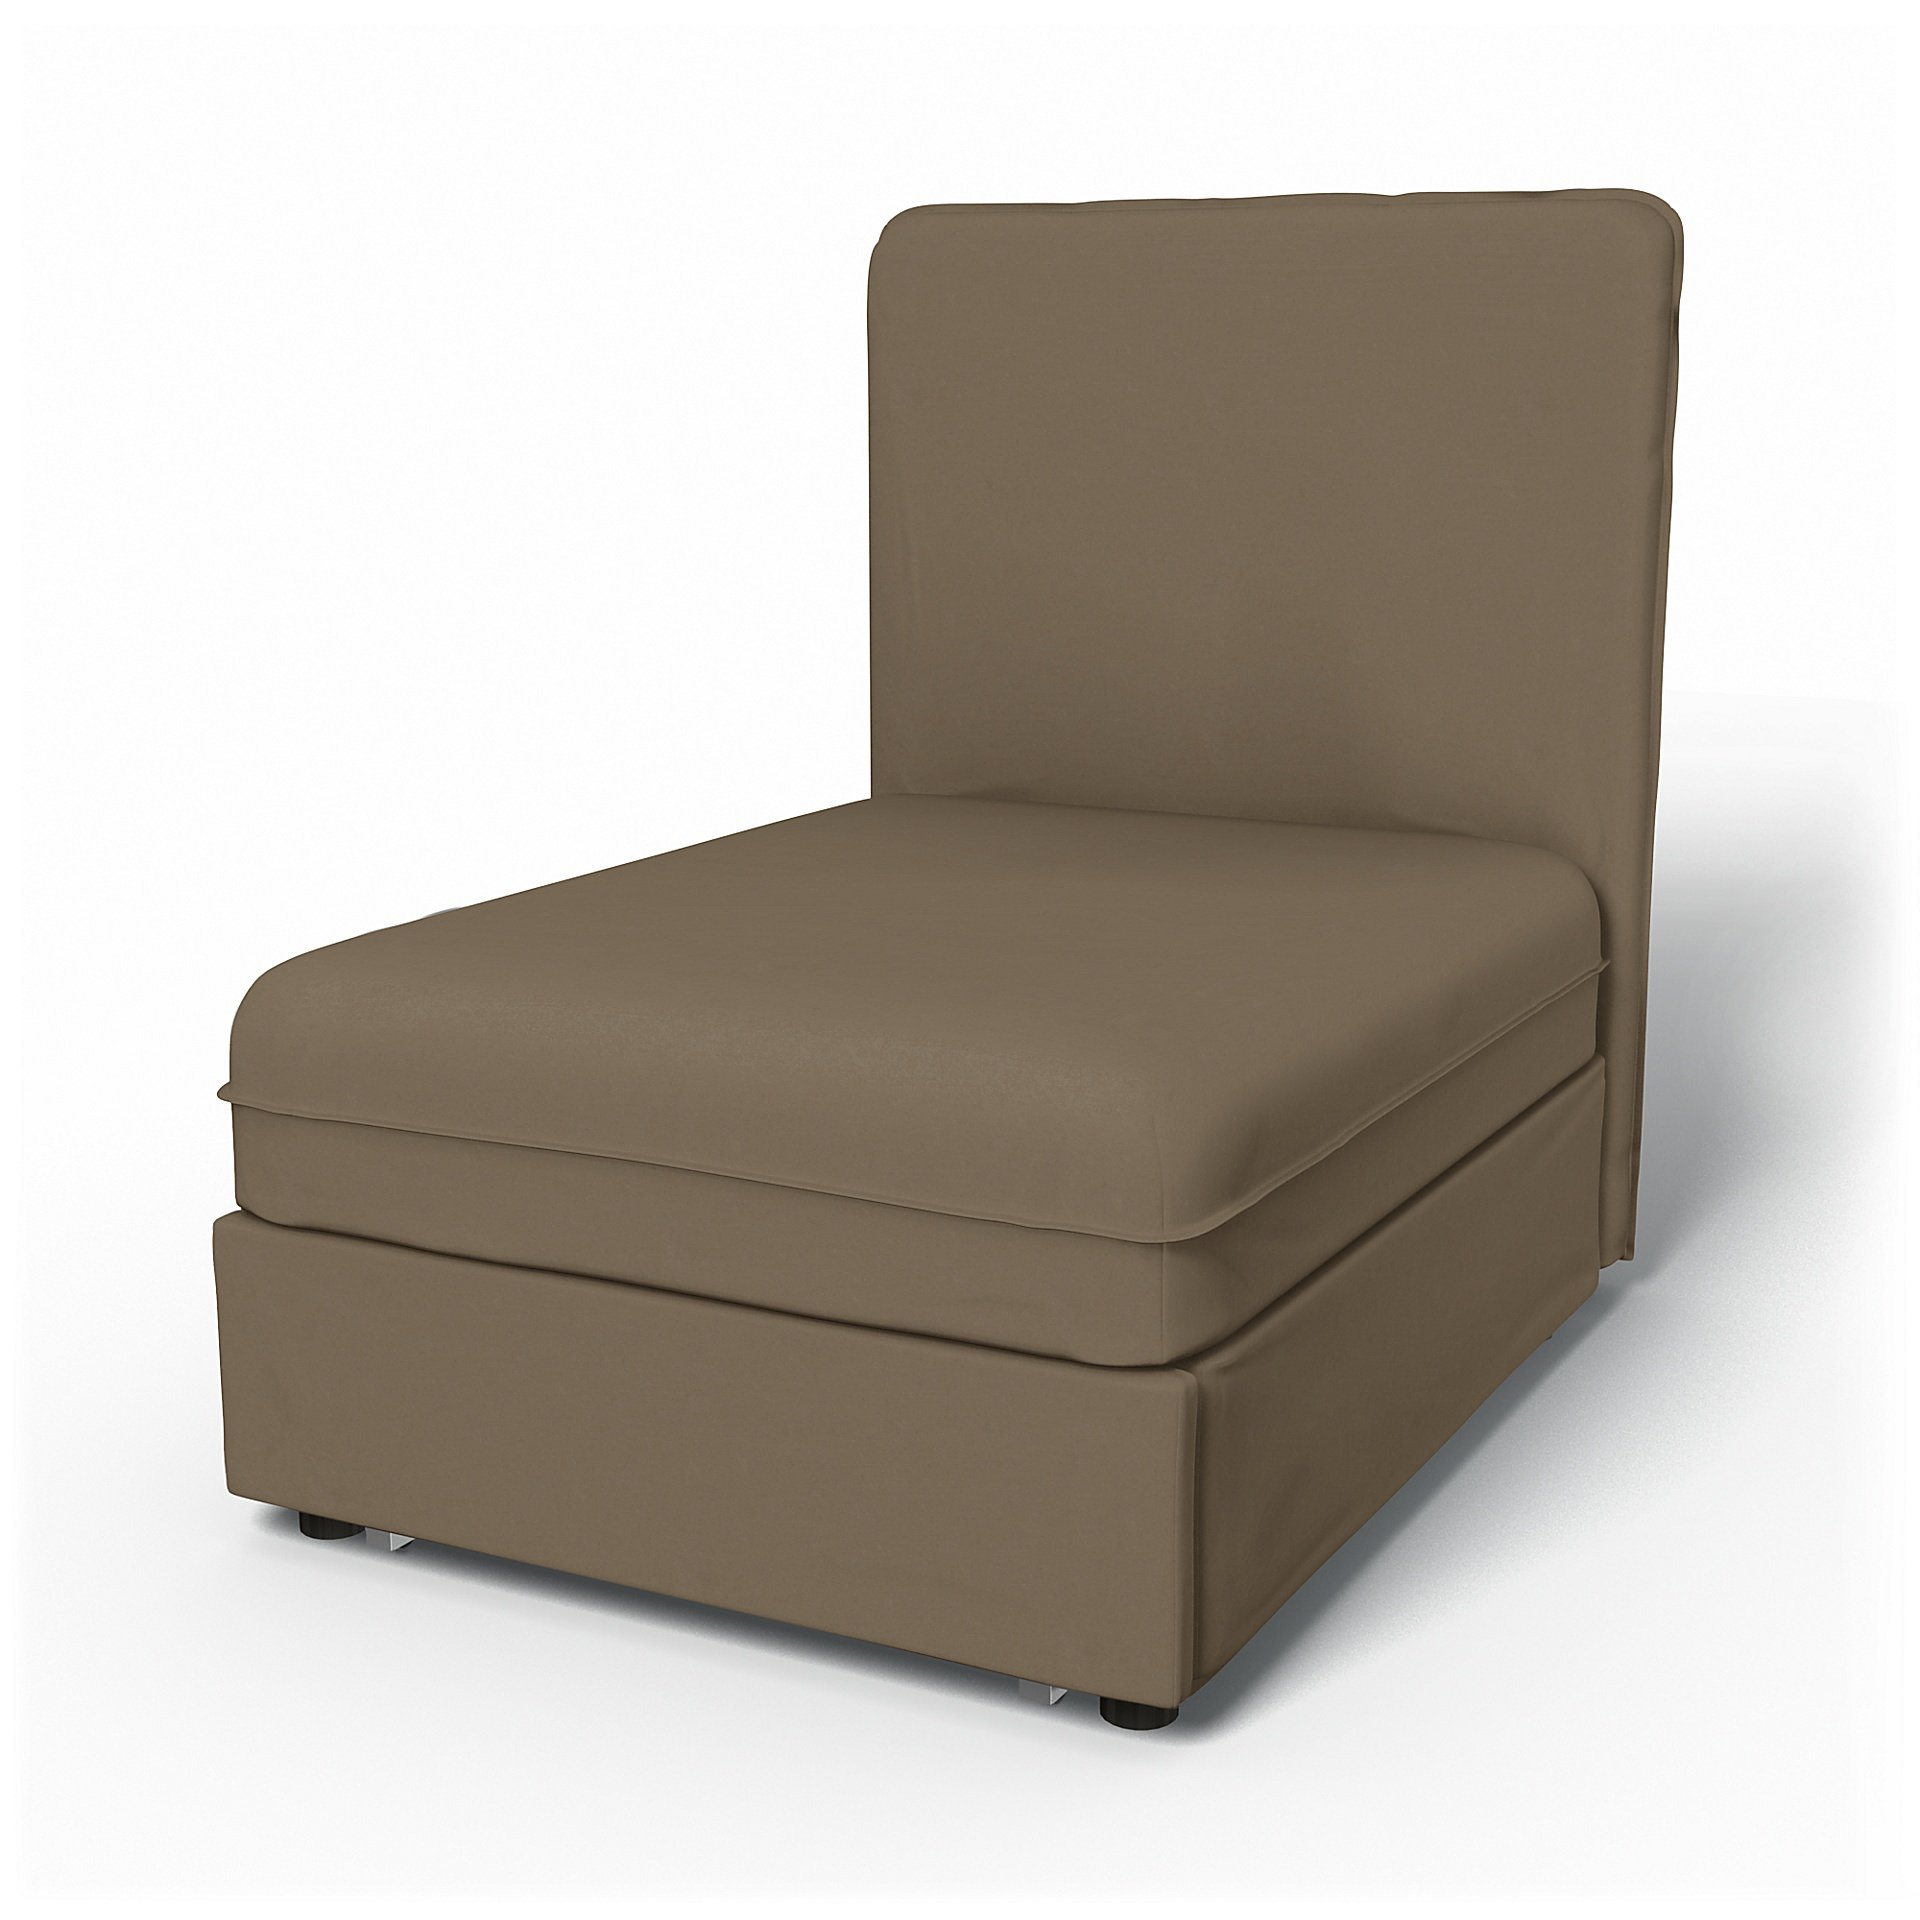 IKEA - Vallentuna Seat Module with High Back Sofa Bed Cover (80x100x46cm), Taupe, Velvet - Bemz